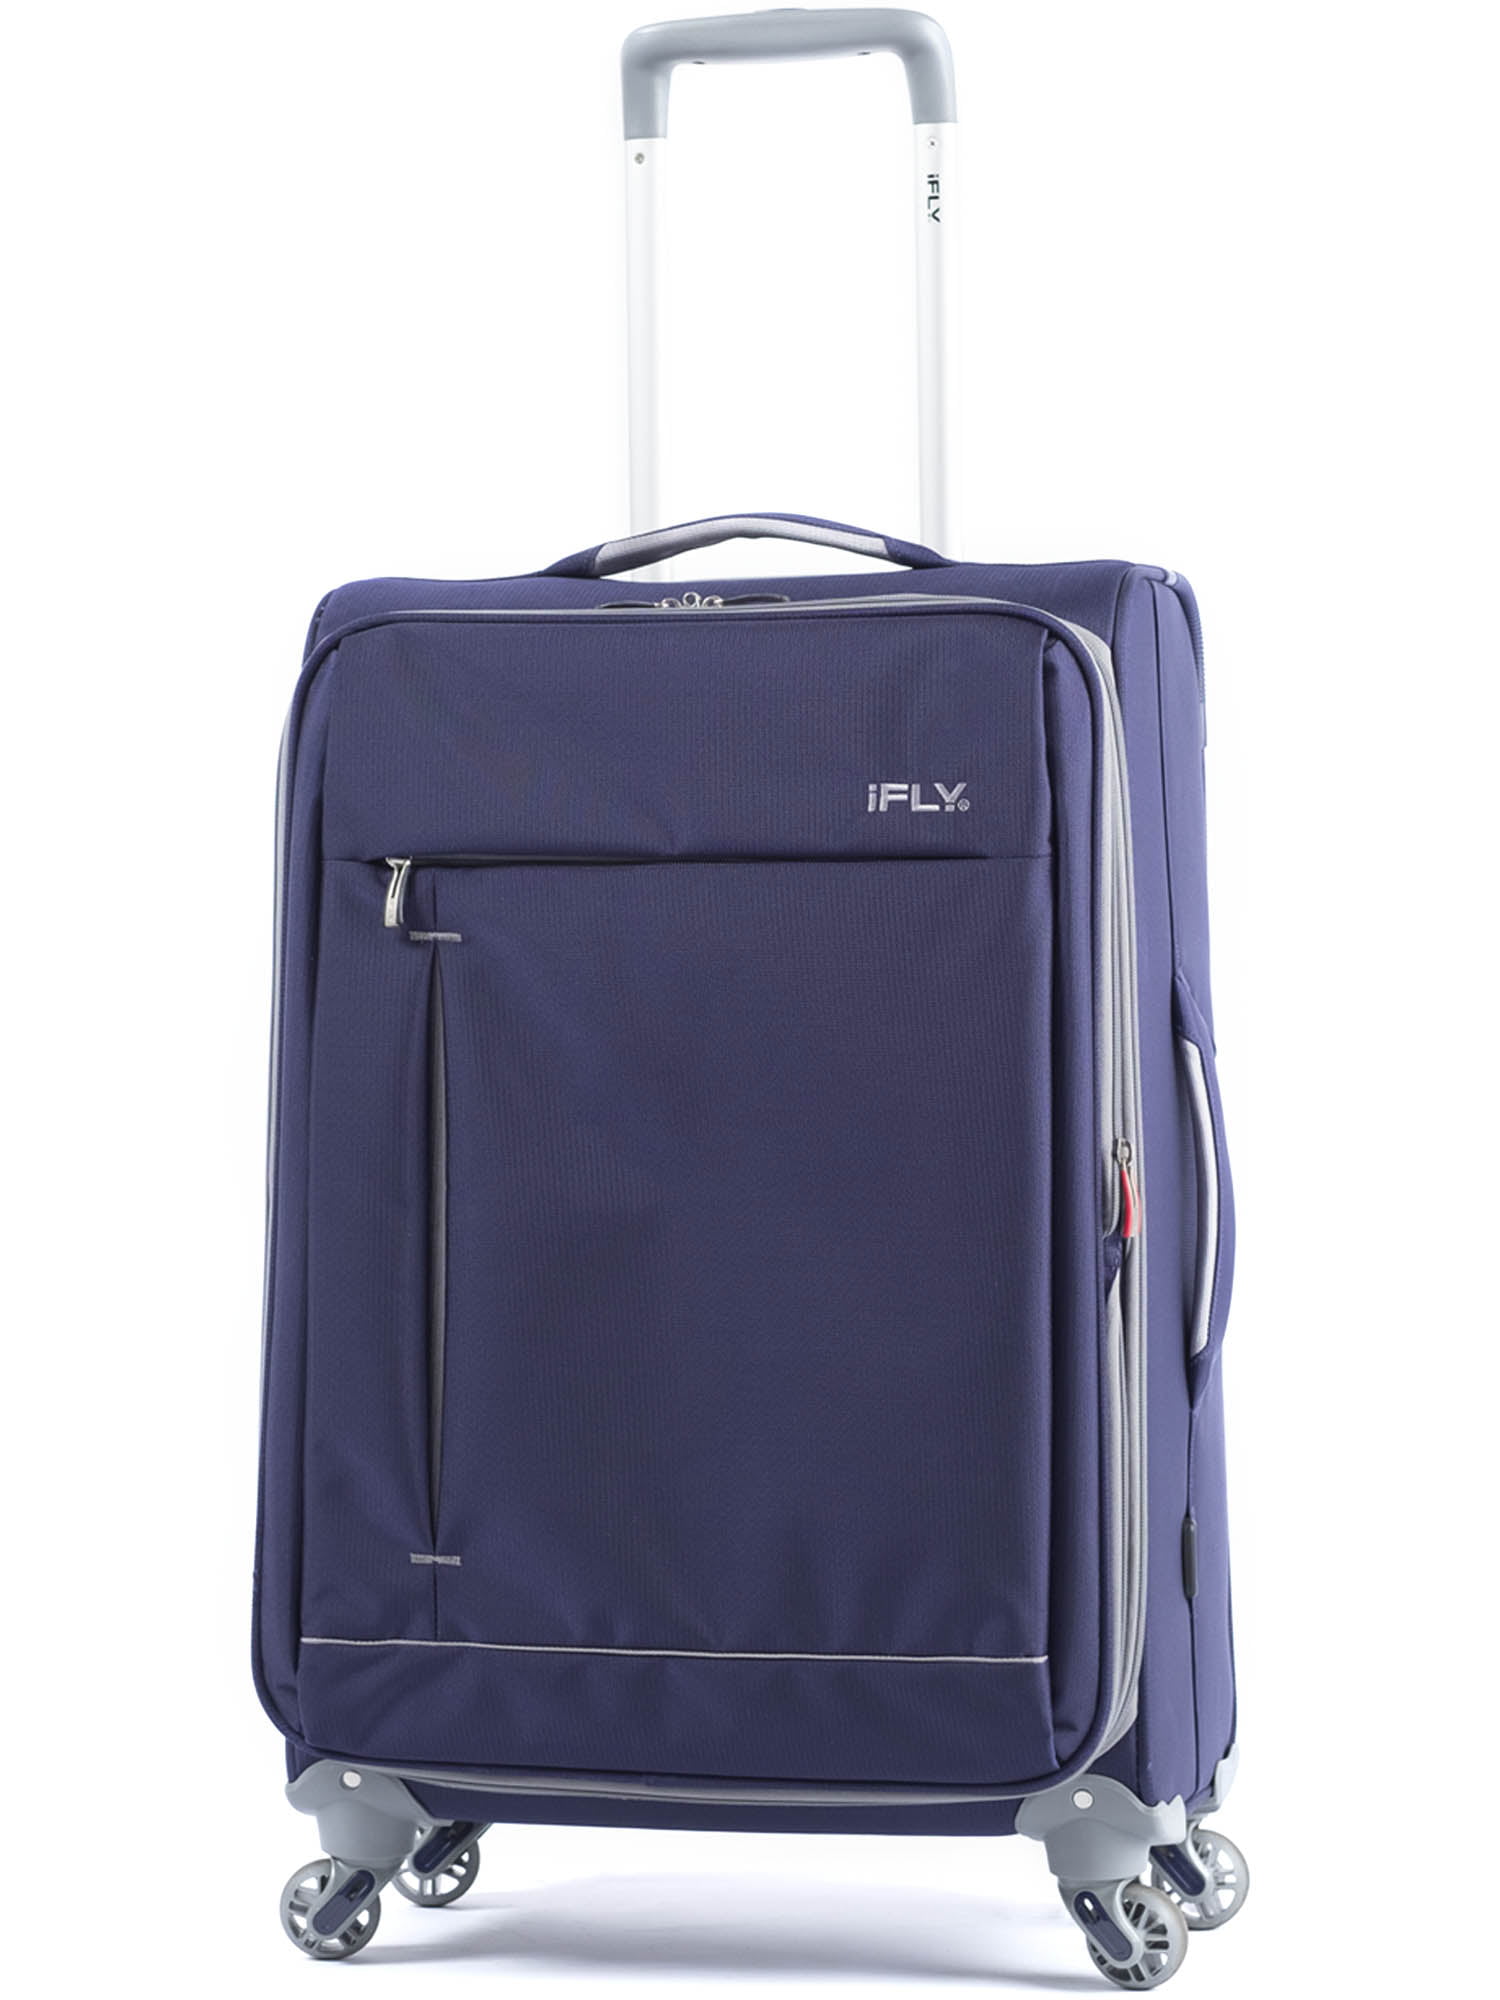 ifly soft sided luggage reviews